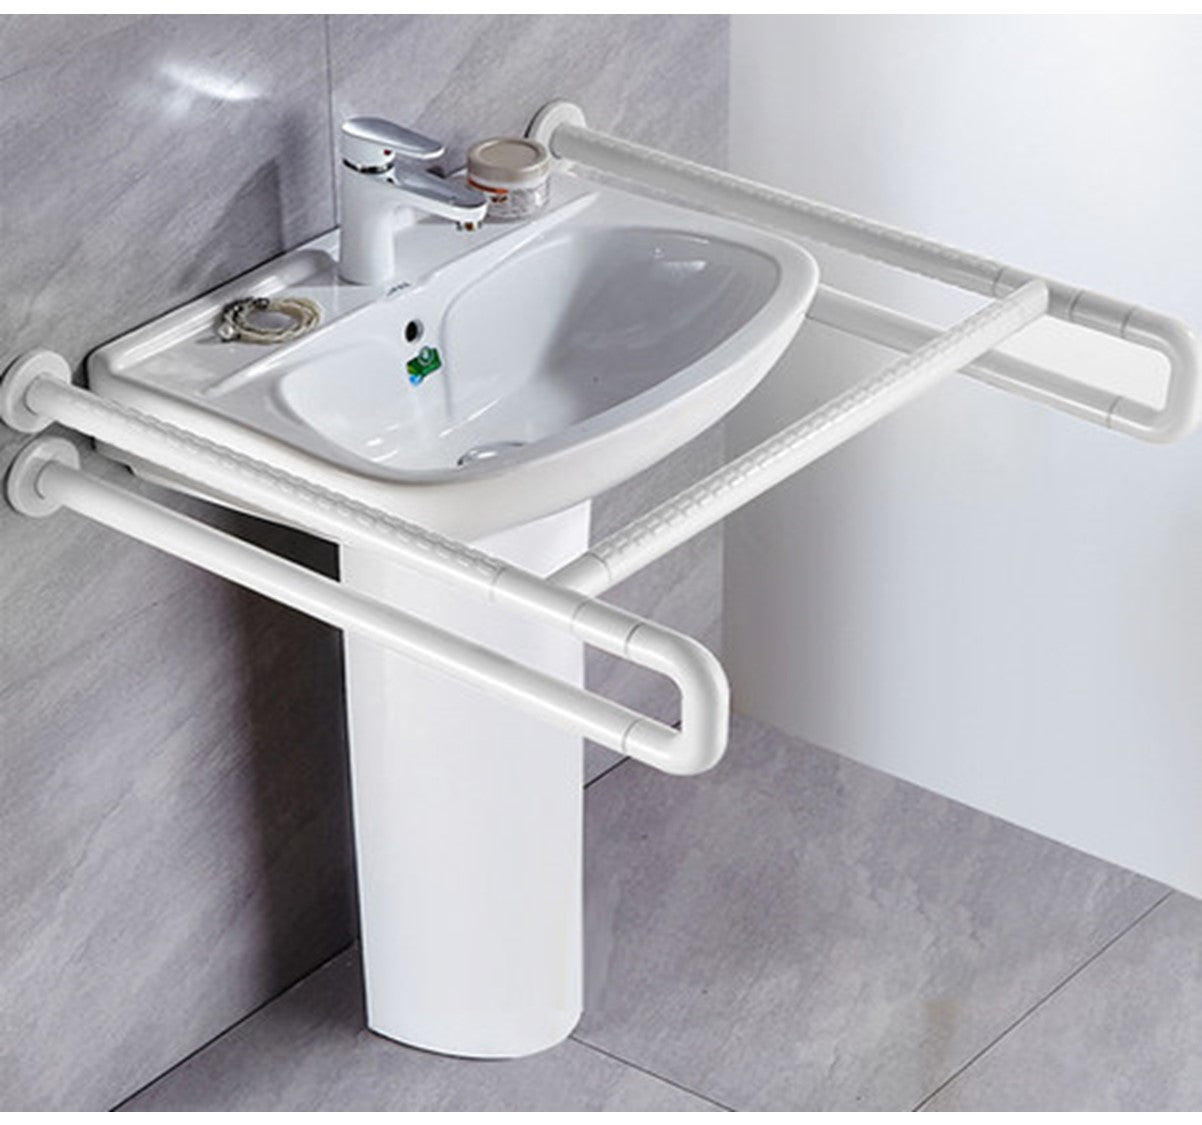 Basin Safety Hand Rail Barrier-Free Wash Room Support Hand Railing